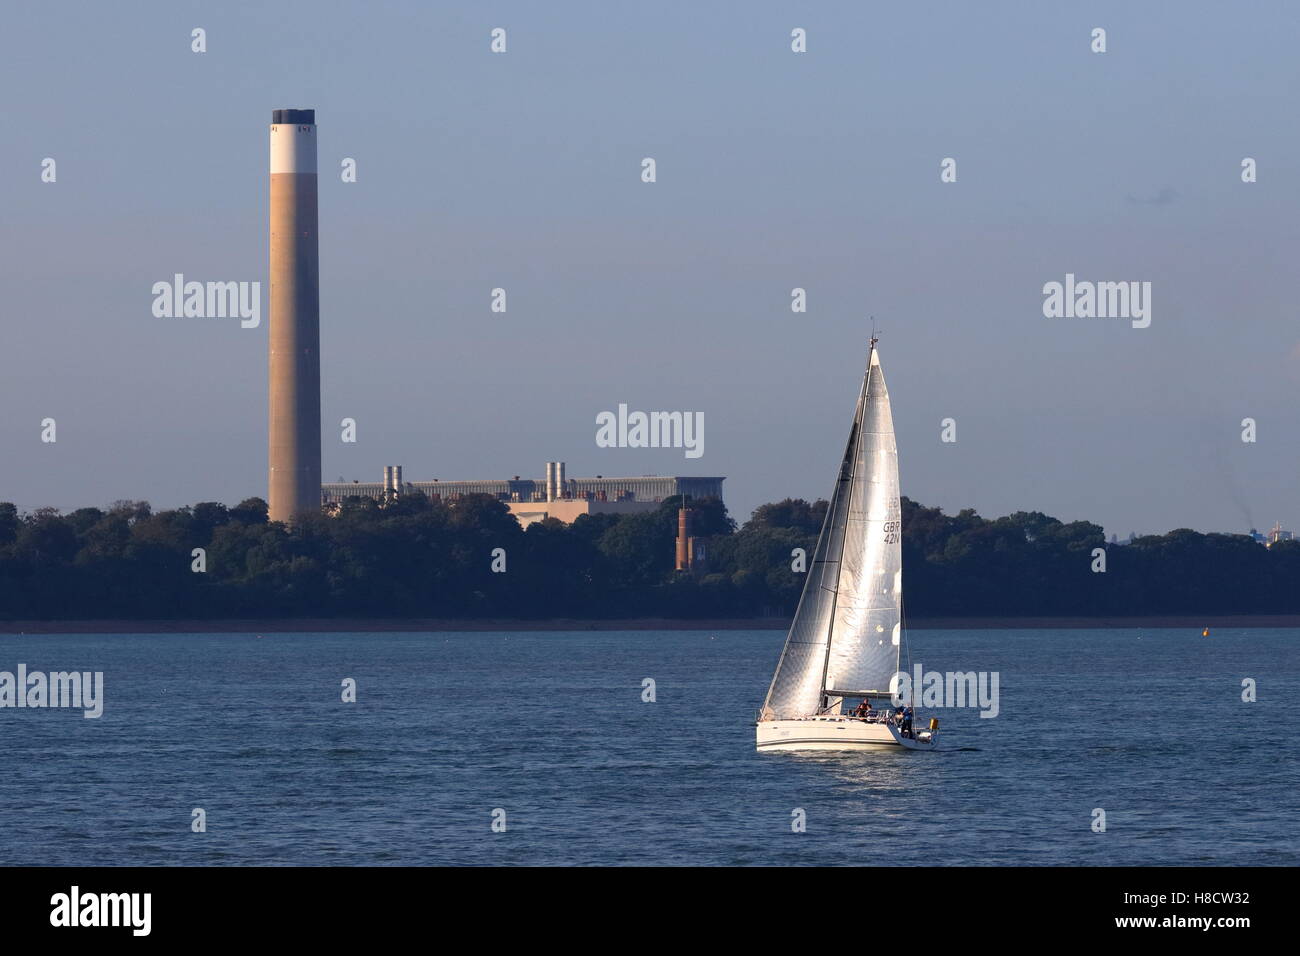 Silver sailed yacht in evening sunshine on The Solent balanced against Fawley power station chimney on Southampton Water Stock Photo